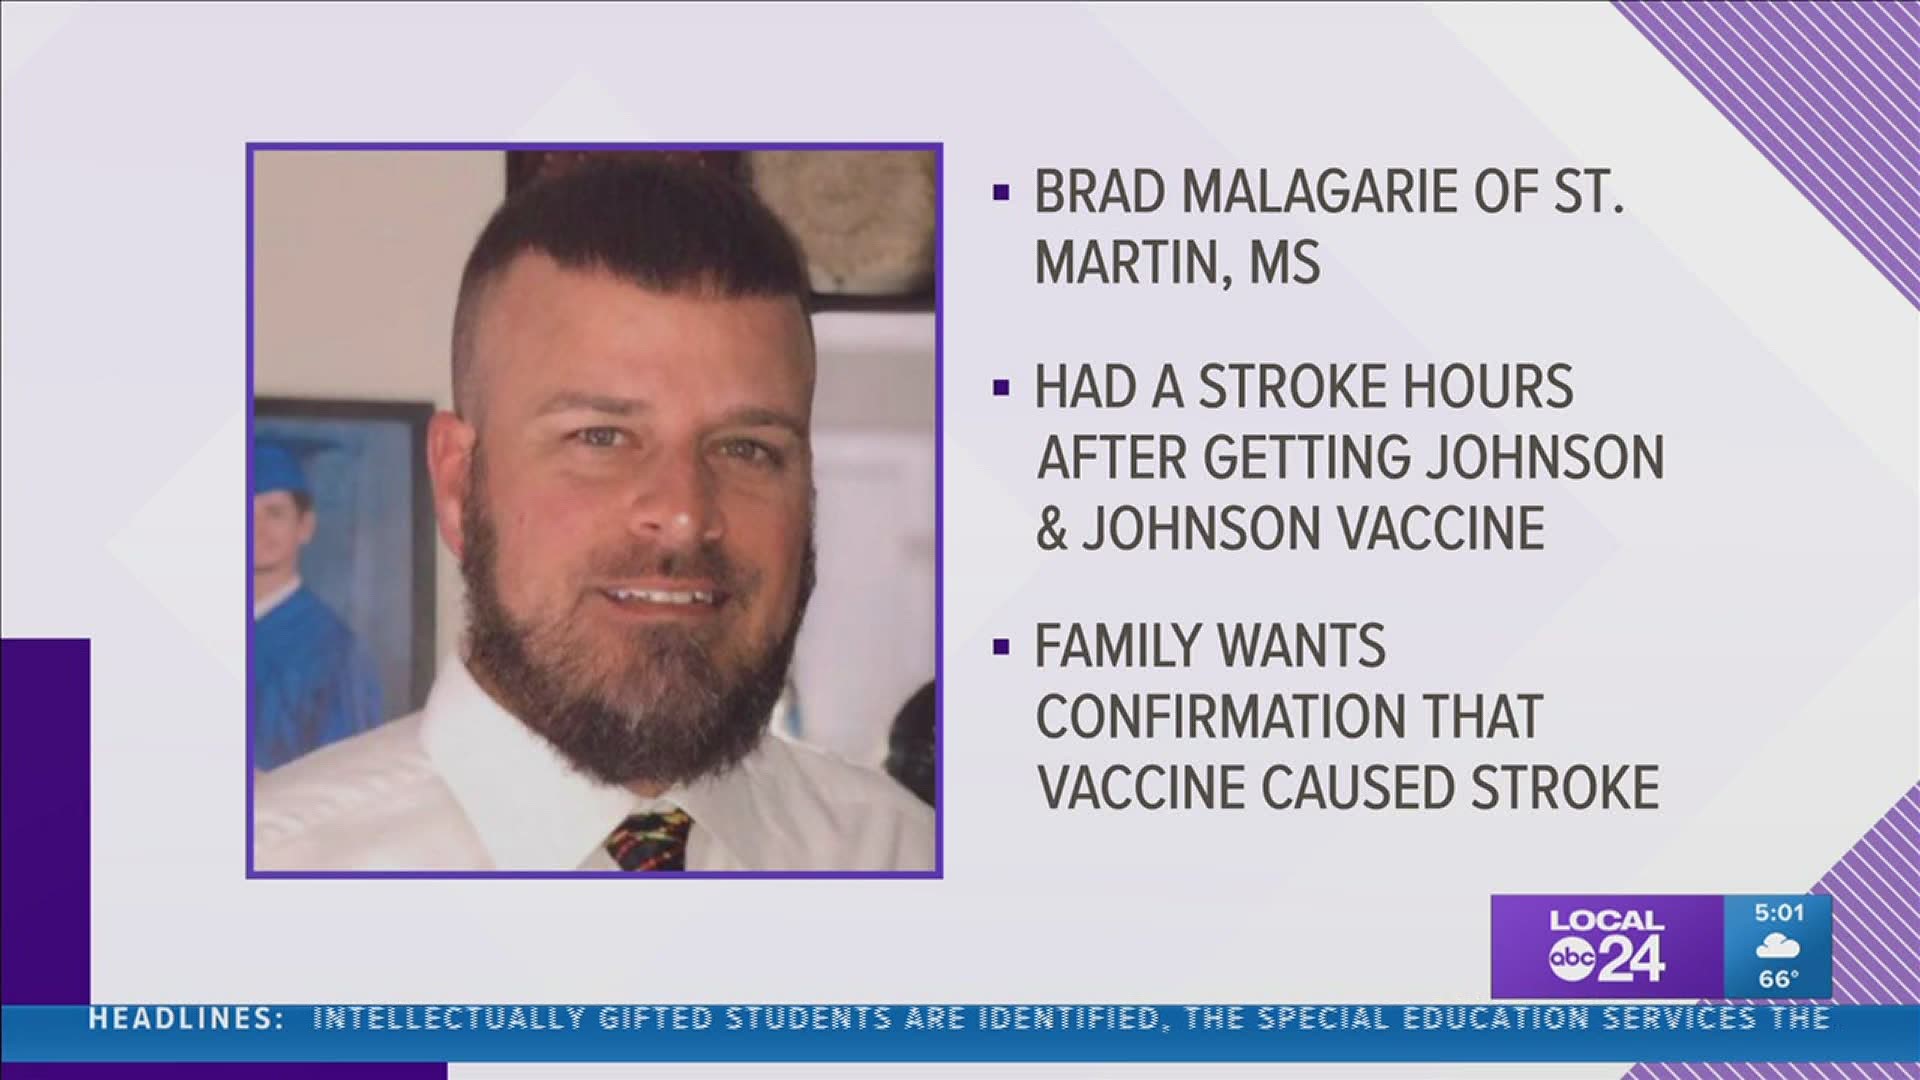 The family said Brad Malagarie got his vaccine, and then hours later, coworkers found him unresponsive at his desk.